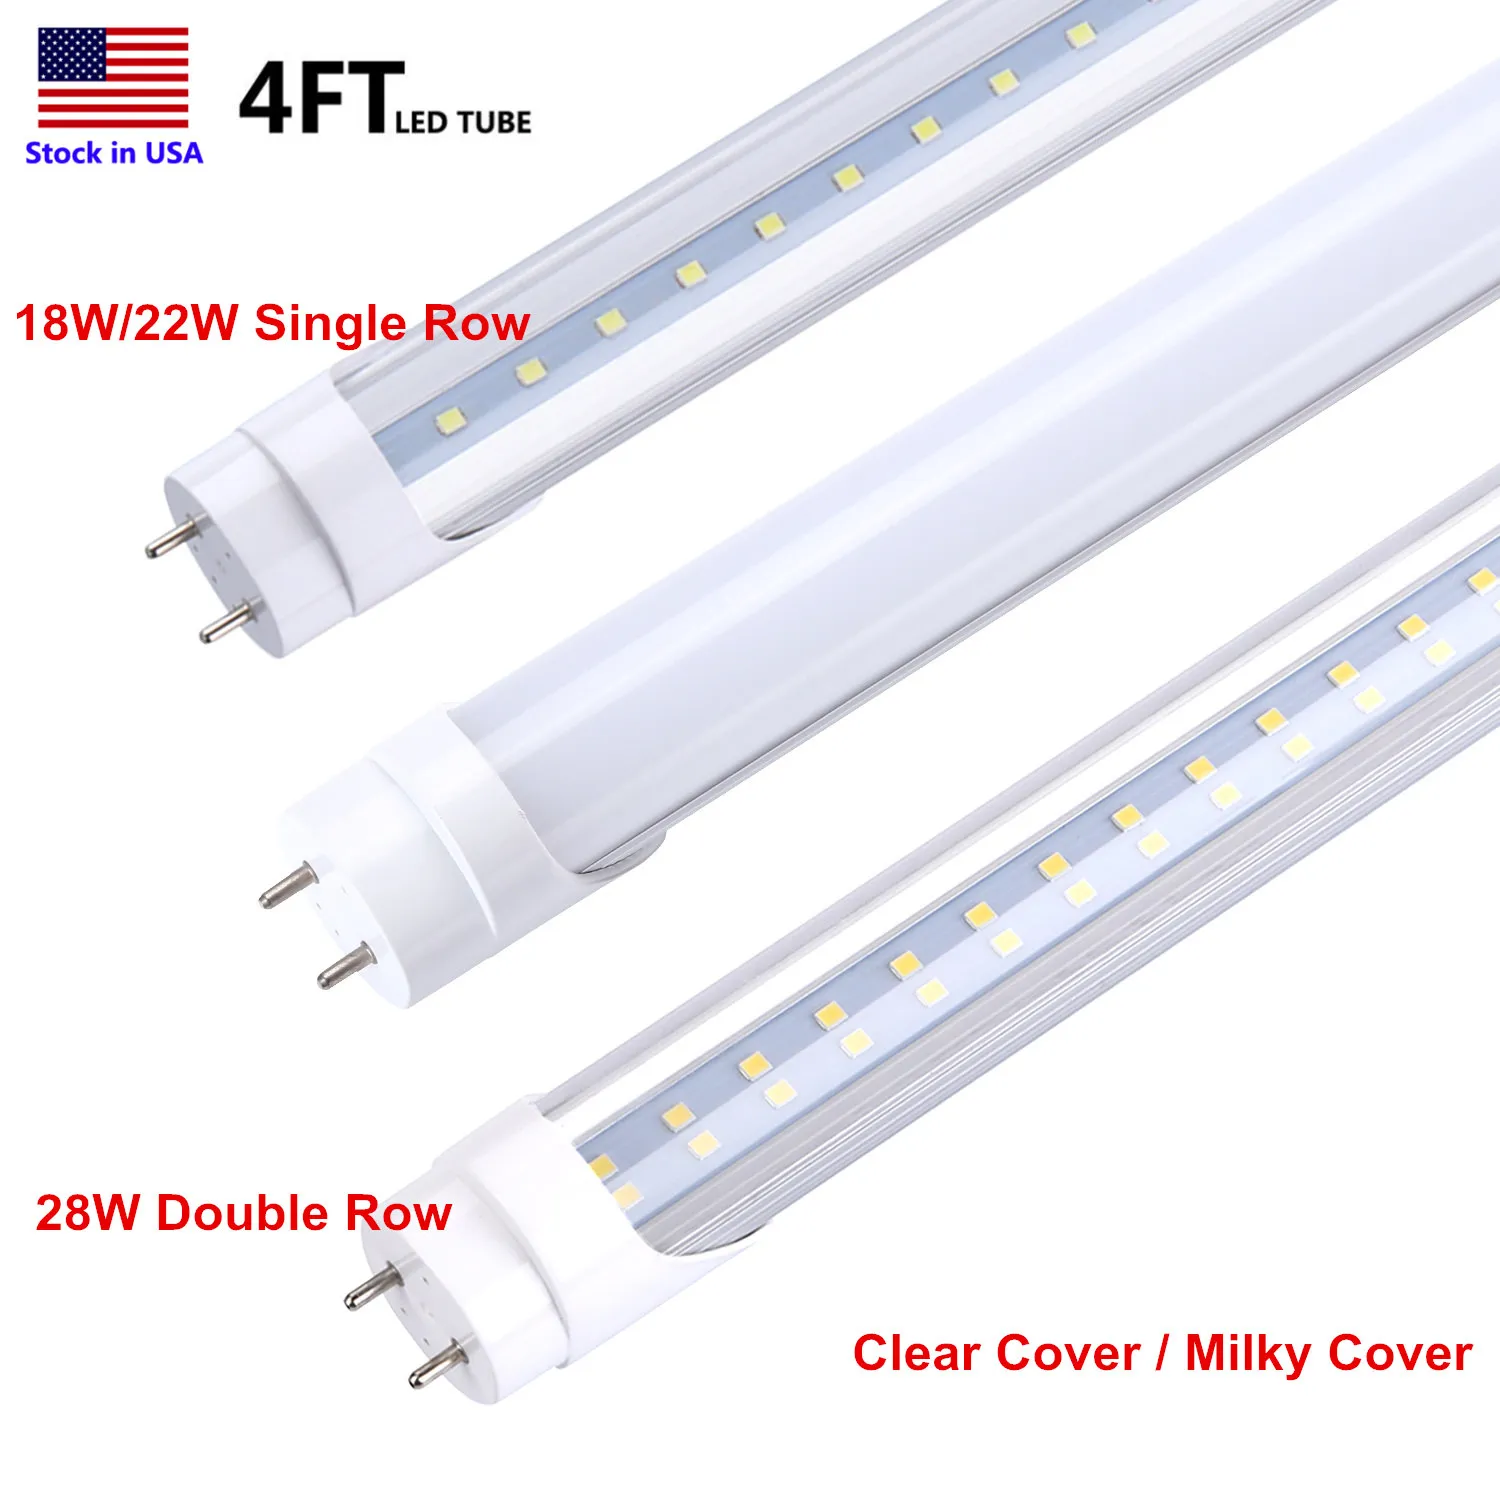 T8 T10 T12 4FT LED Tube Light, 18W 22W 28W, 6000K 5000K, 4 Foot Fluorescent Tubes Replacement, Dual Ended Power, Ballast Bypass, LED Shop Lamp Bulbs